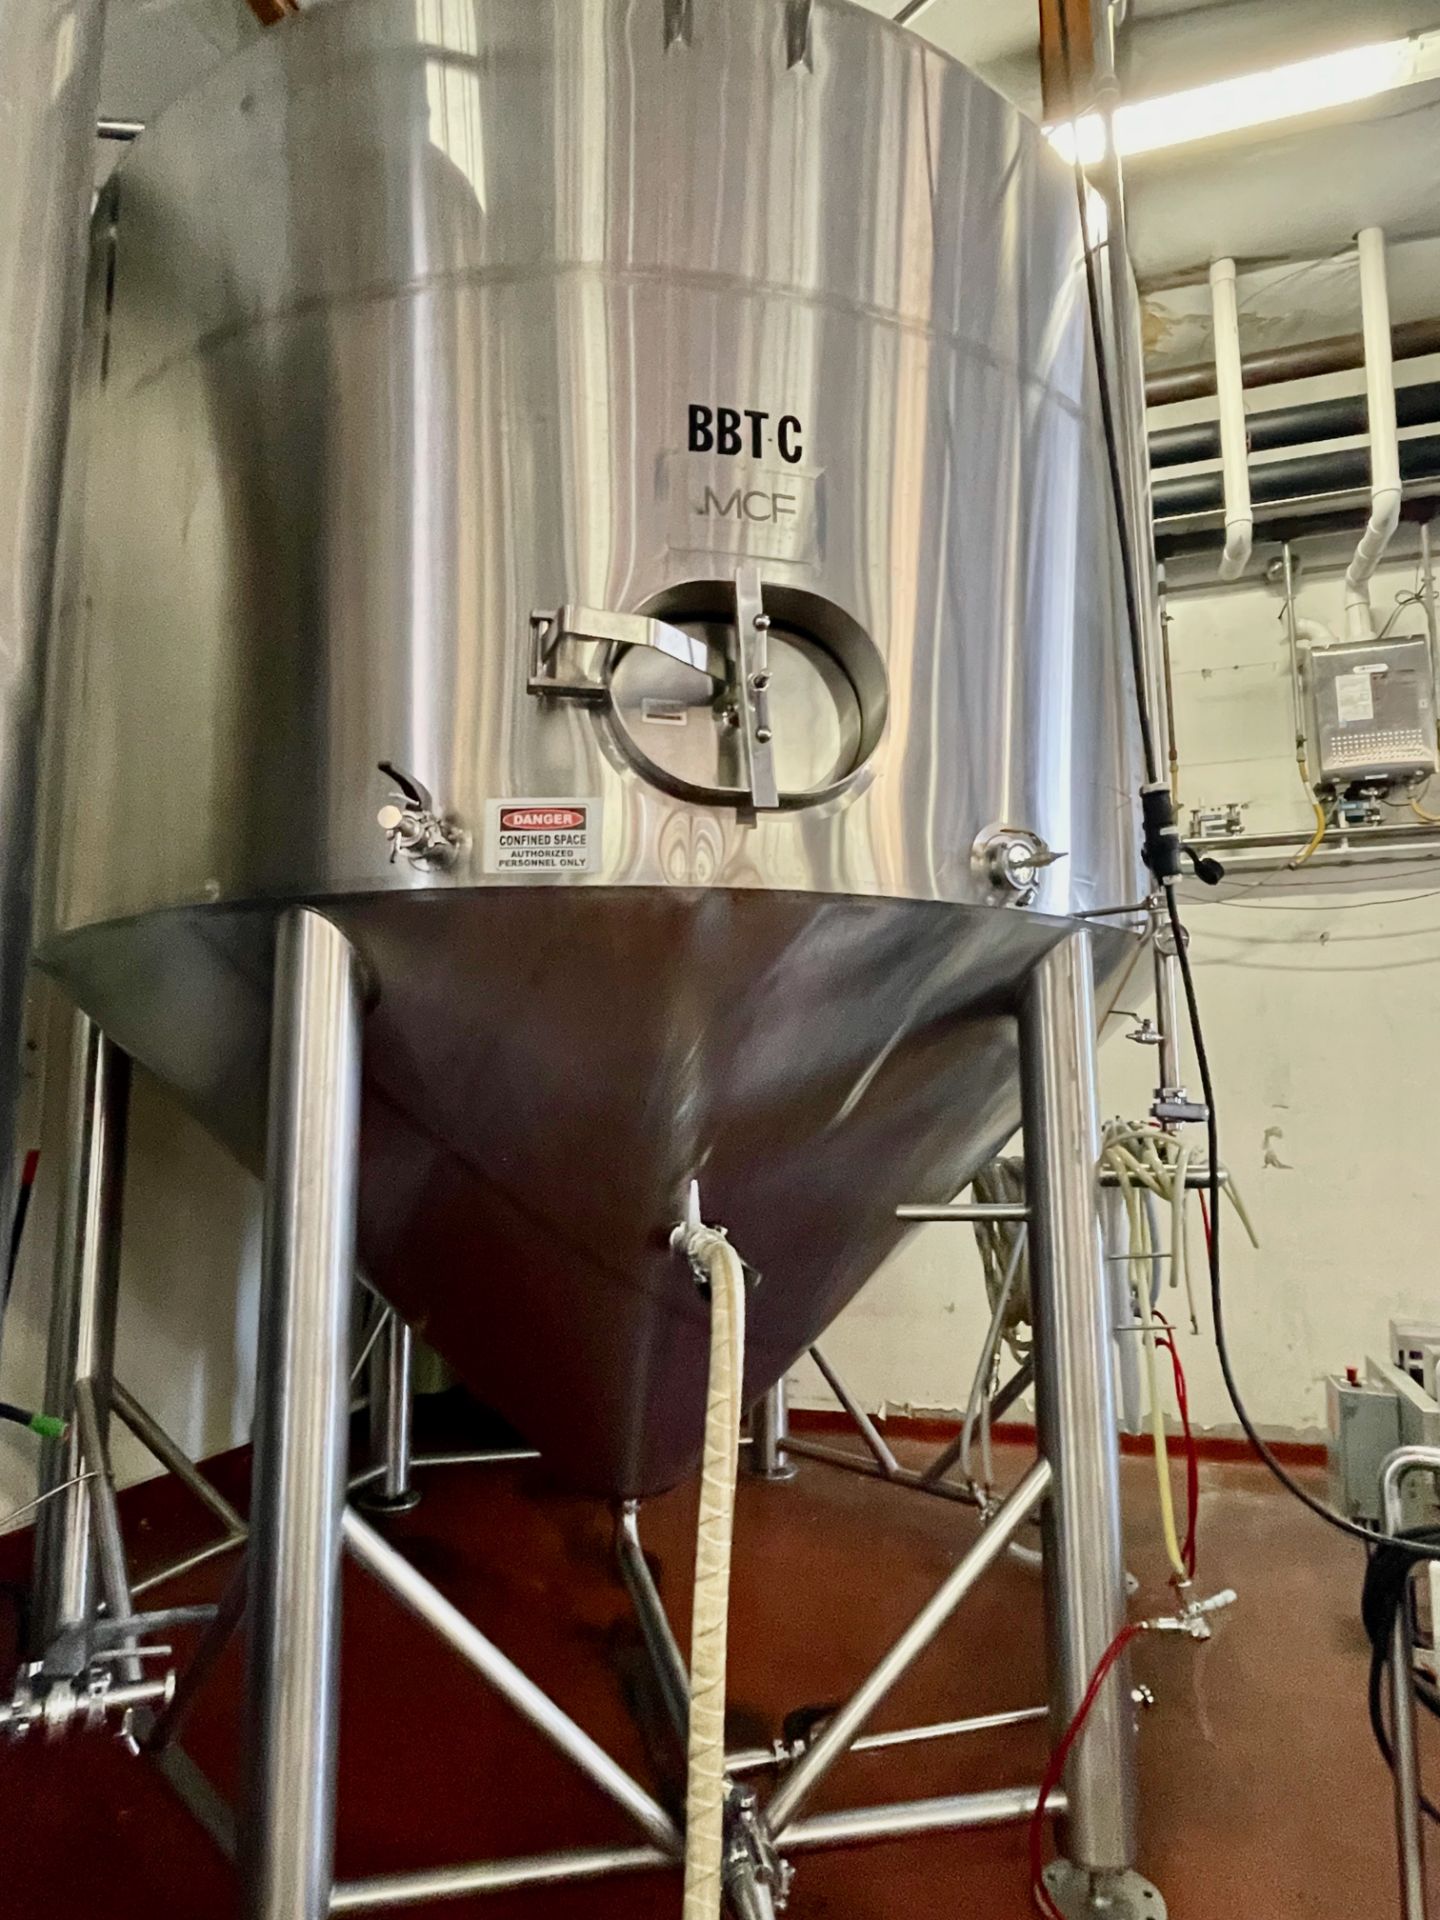 2016 Metalcraft 170 BBL Fermenter, Glycol Jacketed, Steep Cone Bottom, D | Rig Fee: $6350 w/ Saddles - Image 8 of 8